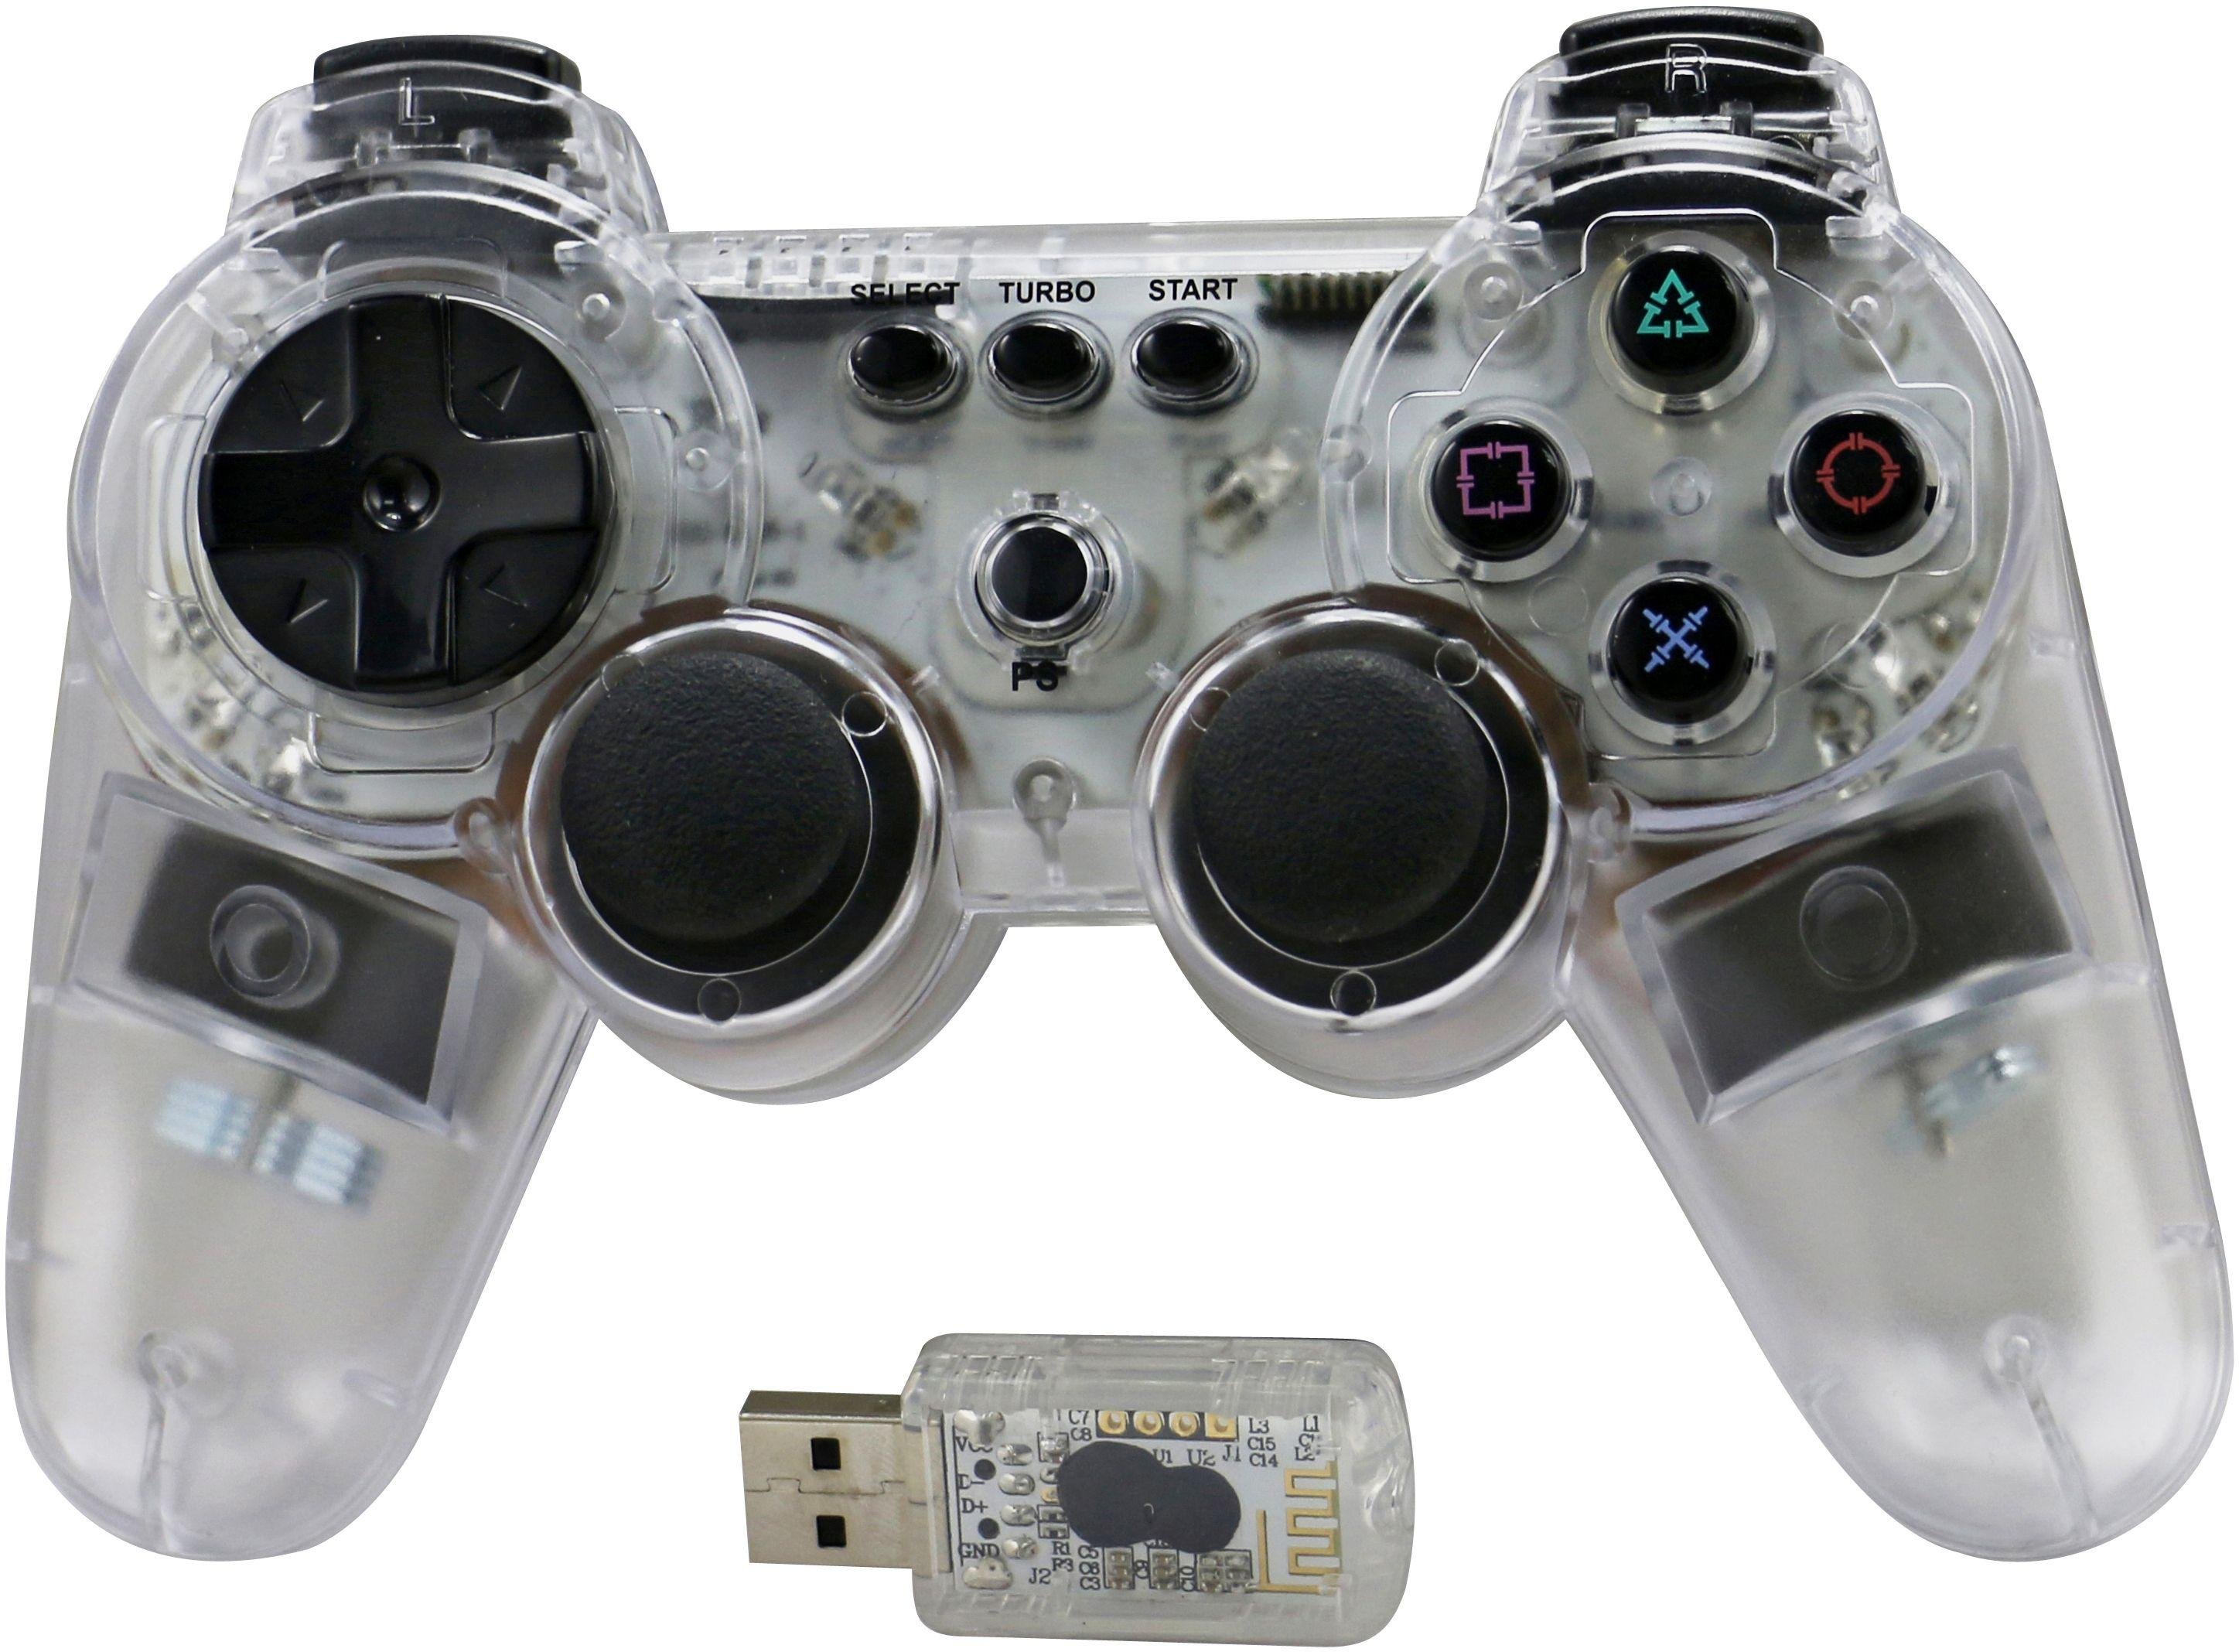 Wireless Controller for PS3 Review